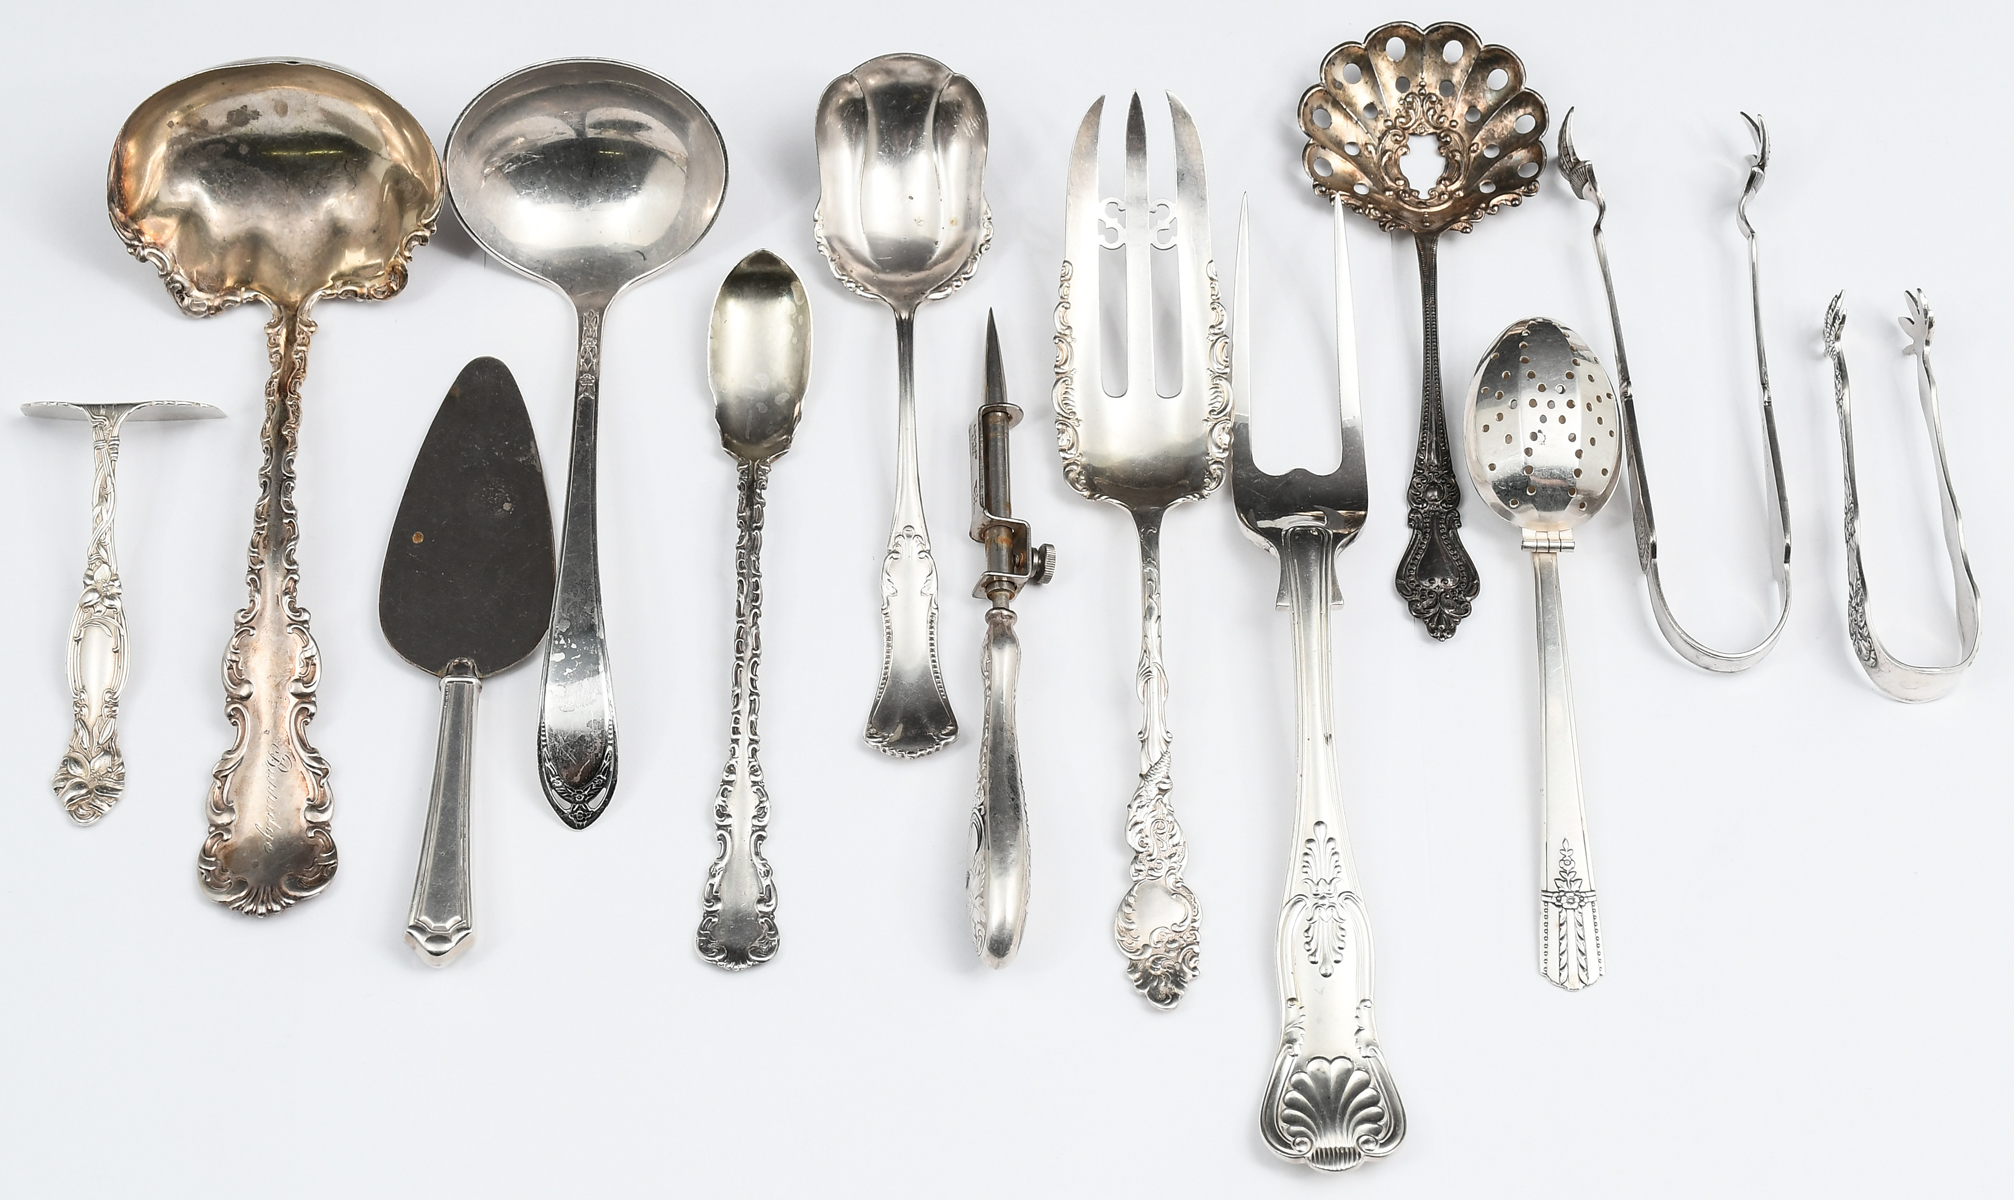 13 PC. STERLING SILVER SERVING PIECES: